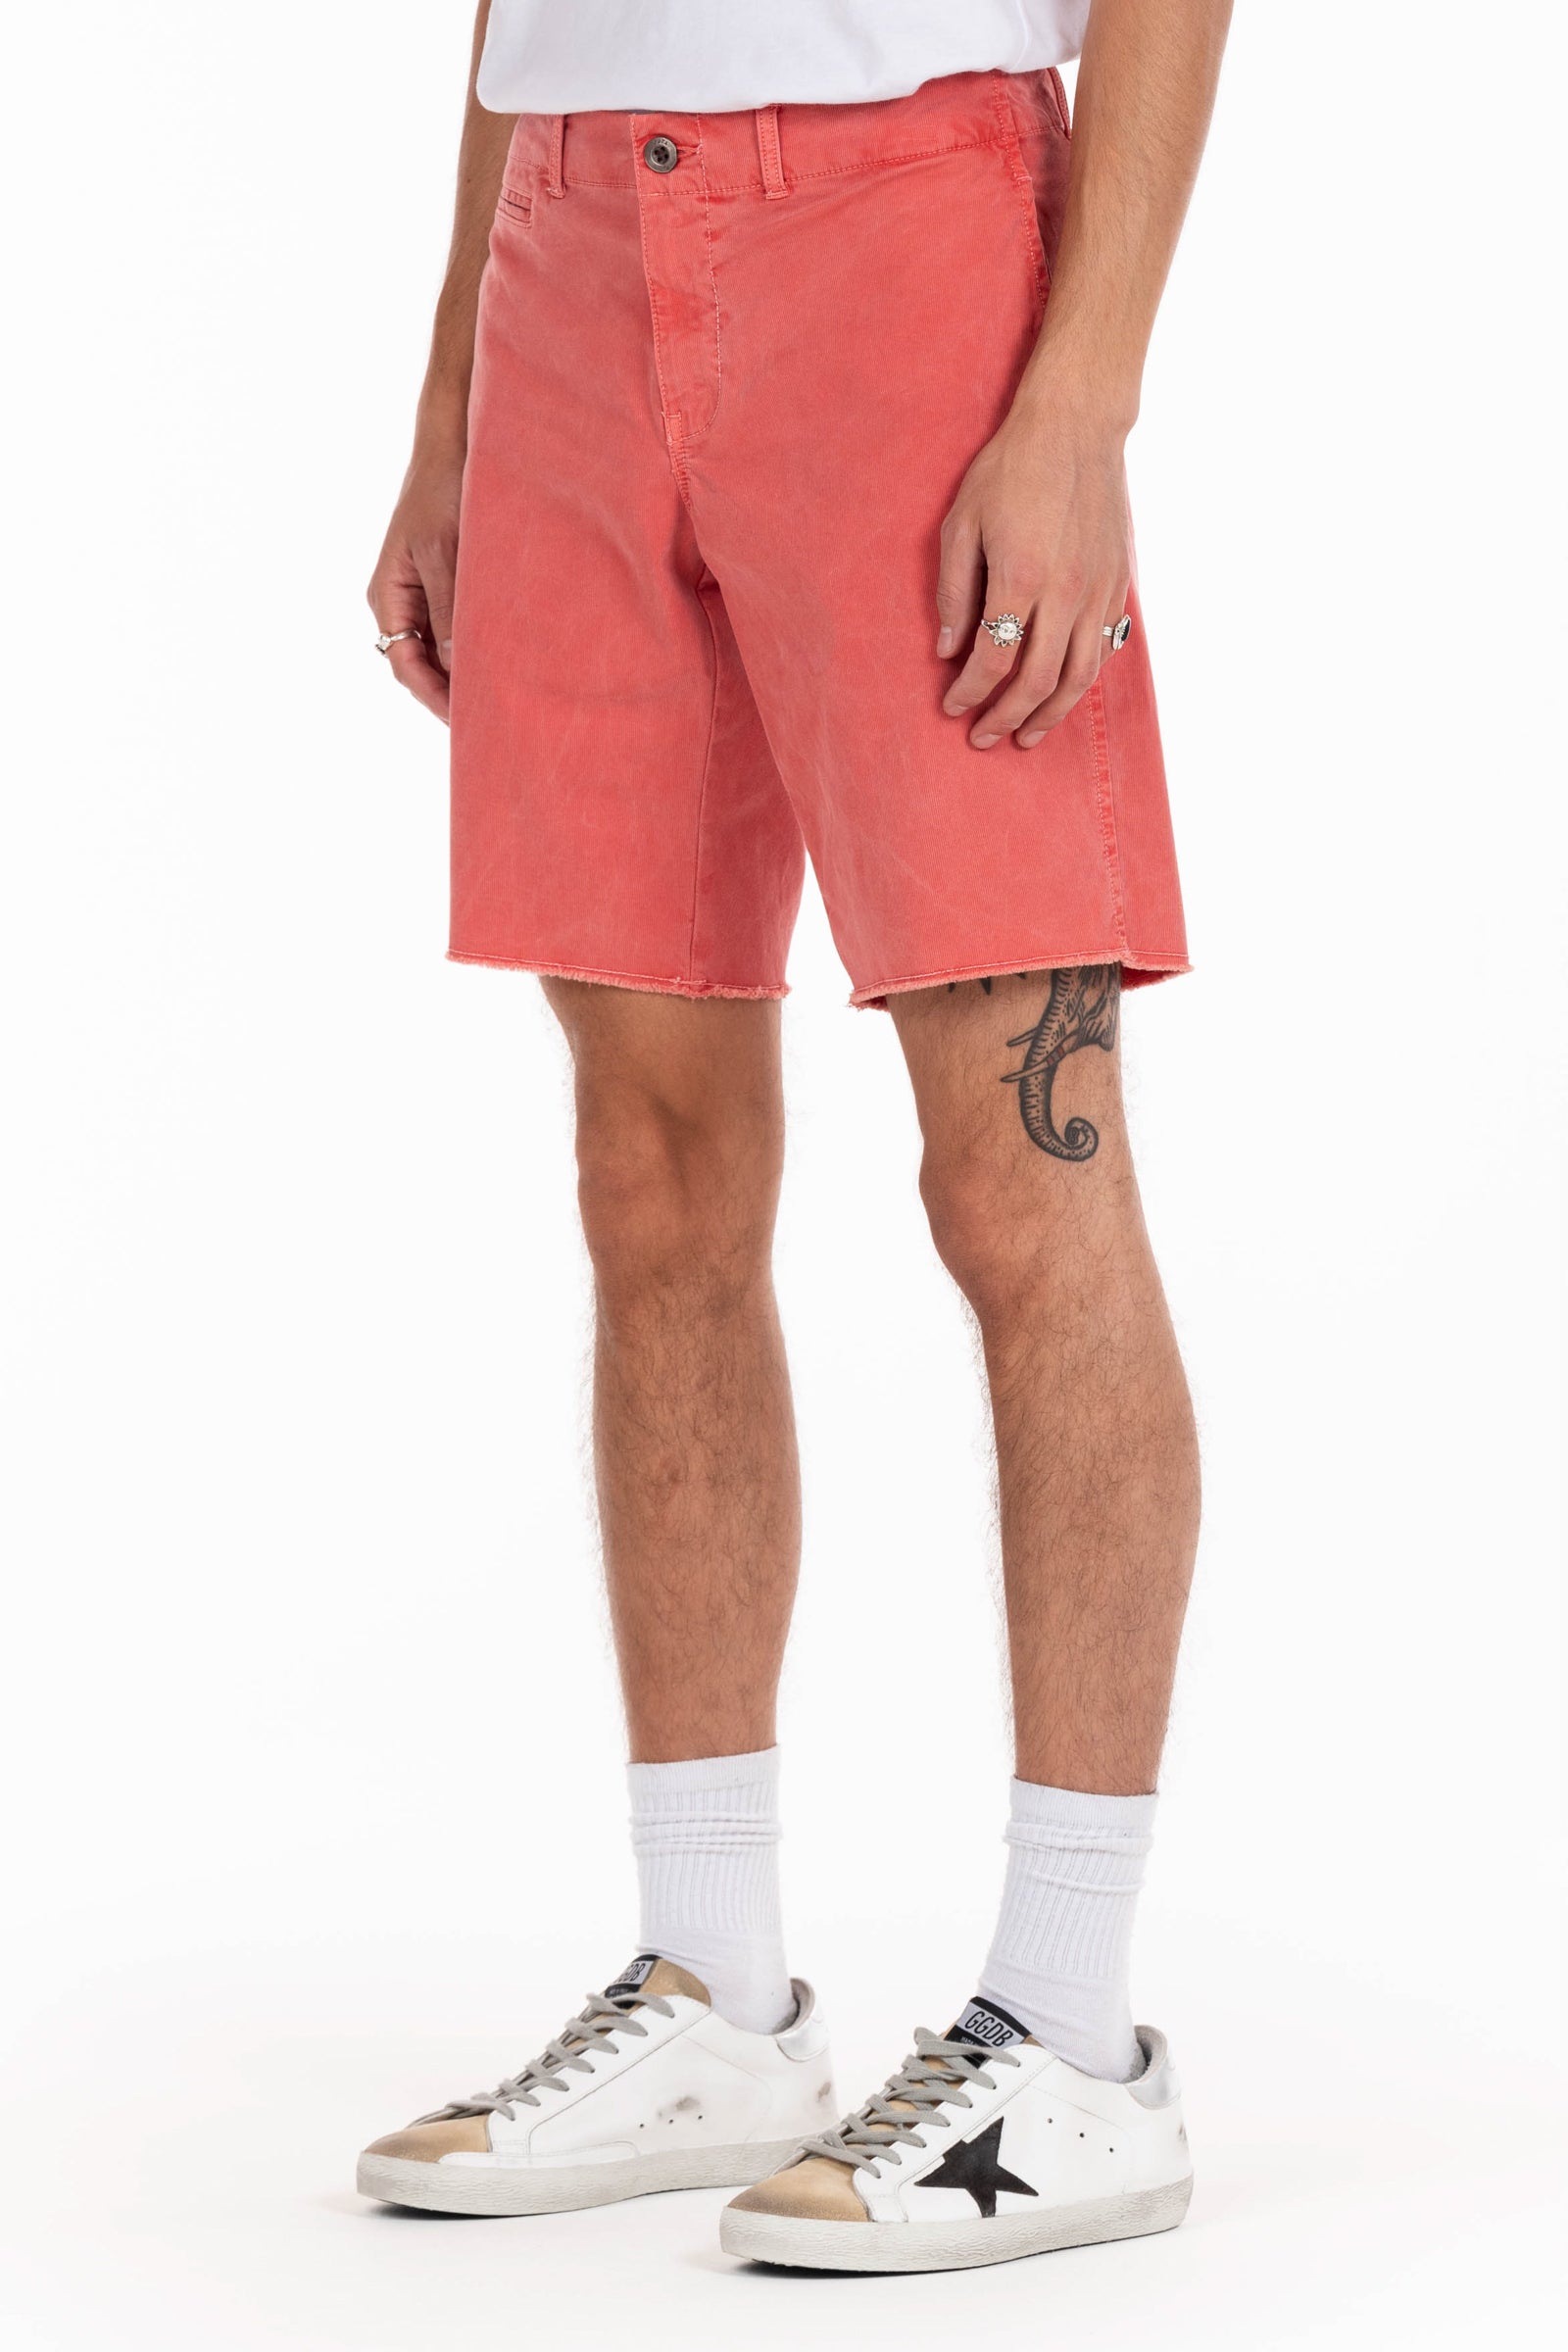 Original Paperbacks Rockland Chino Short in Persimmon on Model Cropped Side View